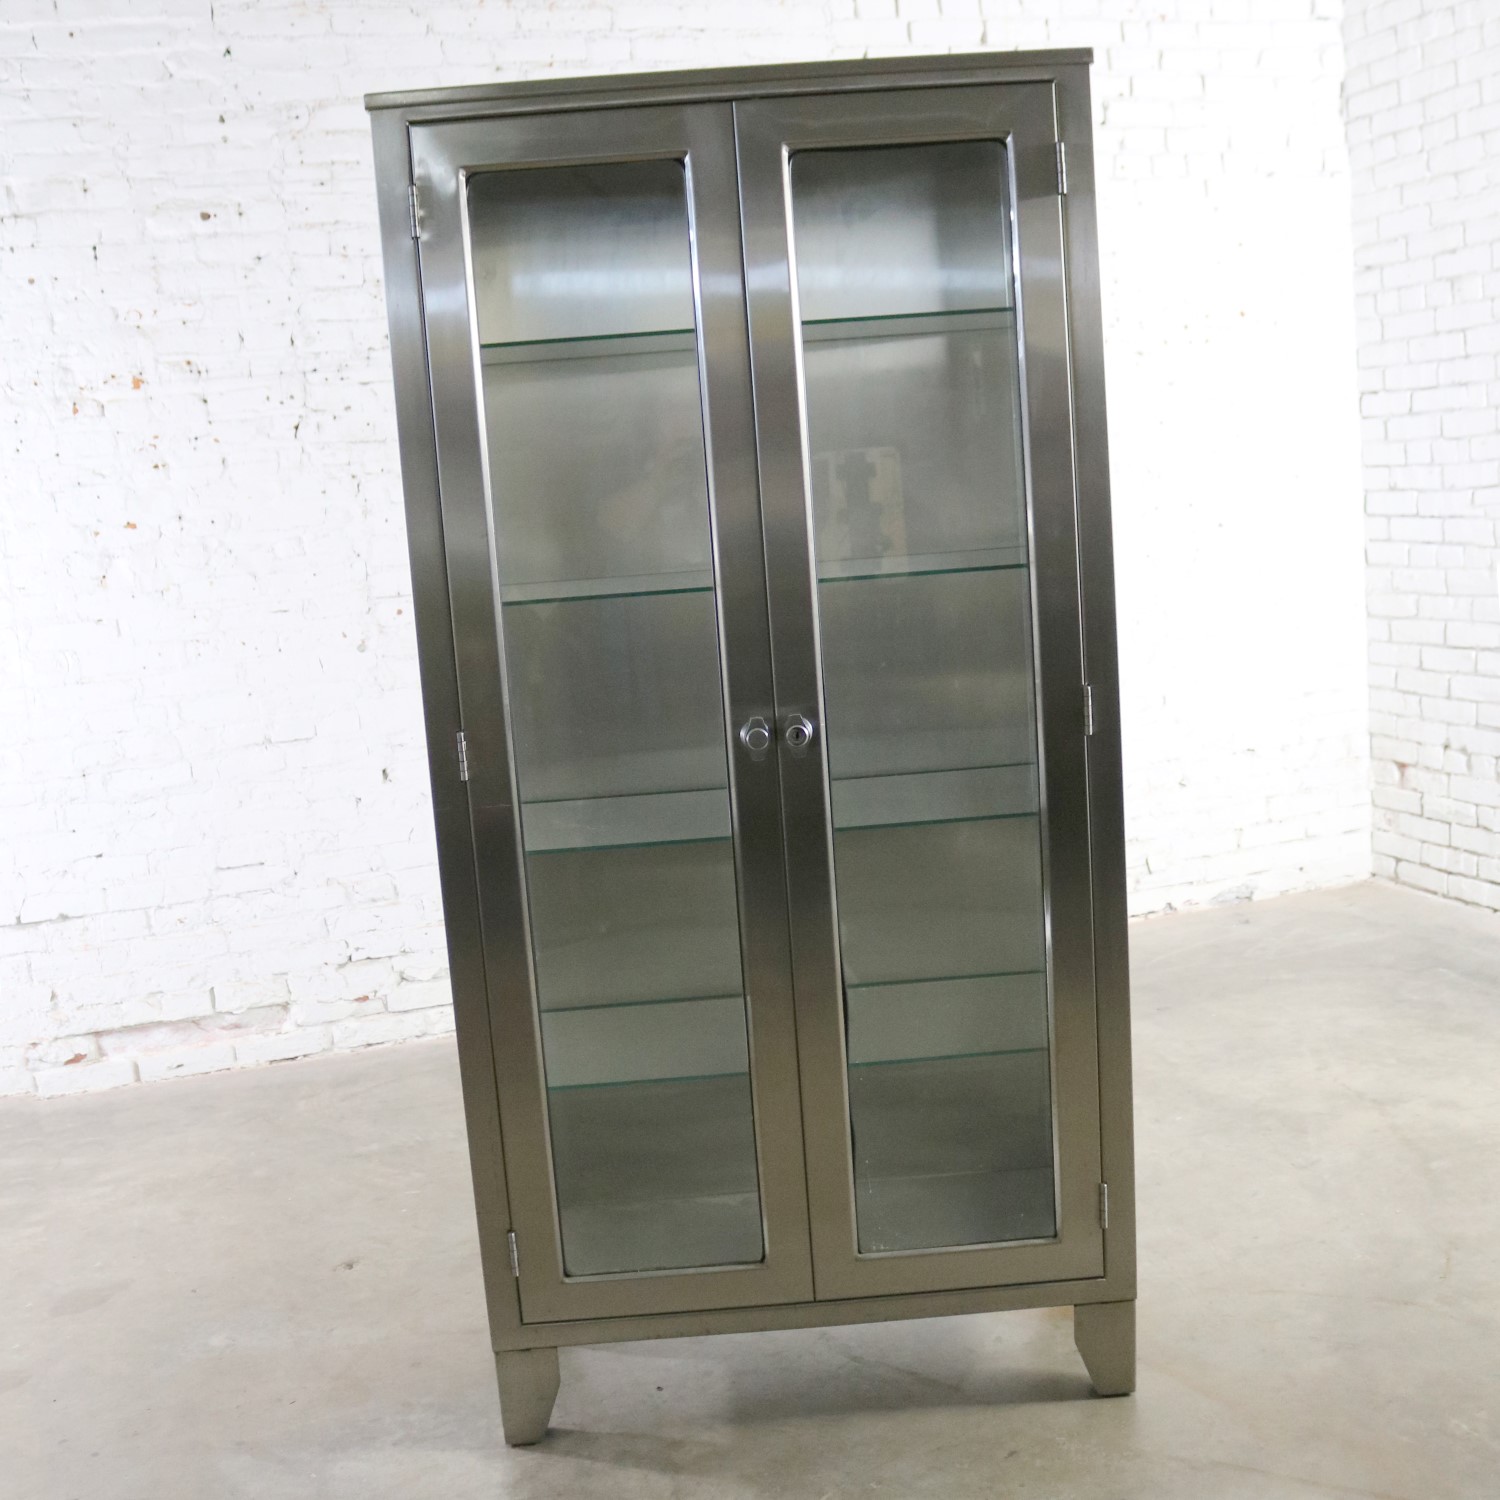 Vintage Stainless Steel Industrial Display Apothecary Medical Cabinet with Glass Doors and Shelves 39-6